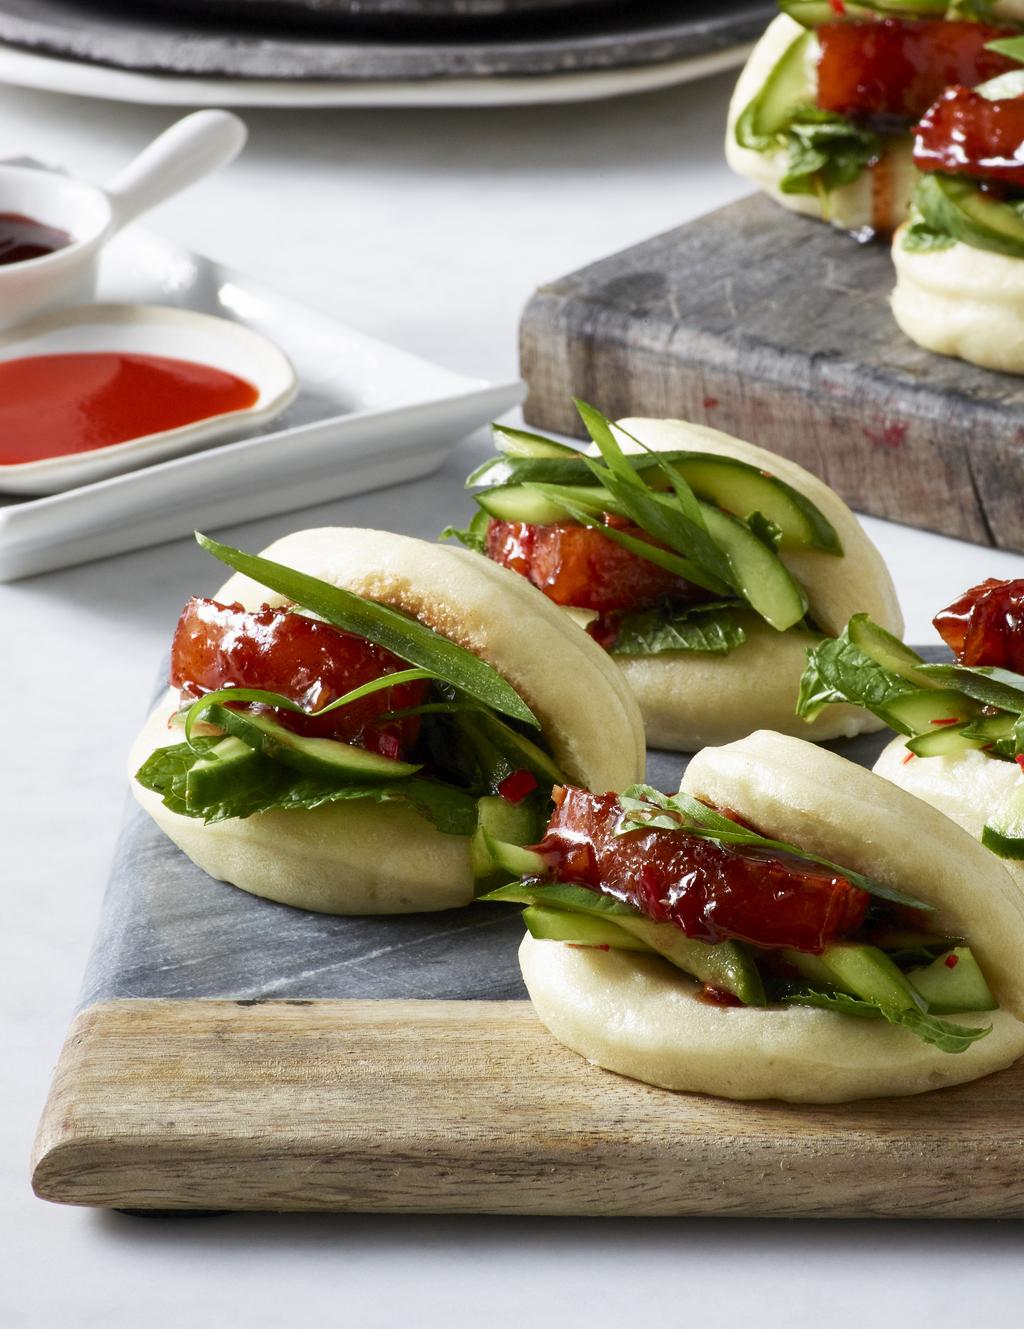 Steamed Bao Buns with Pork Belly and Cucumber Pickle